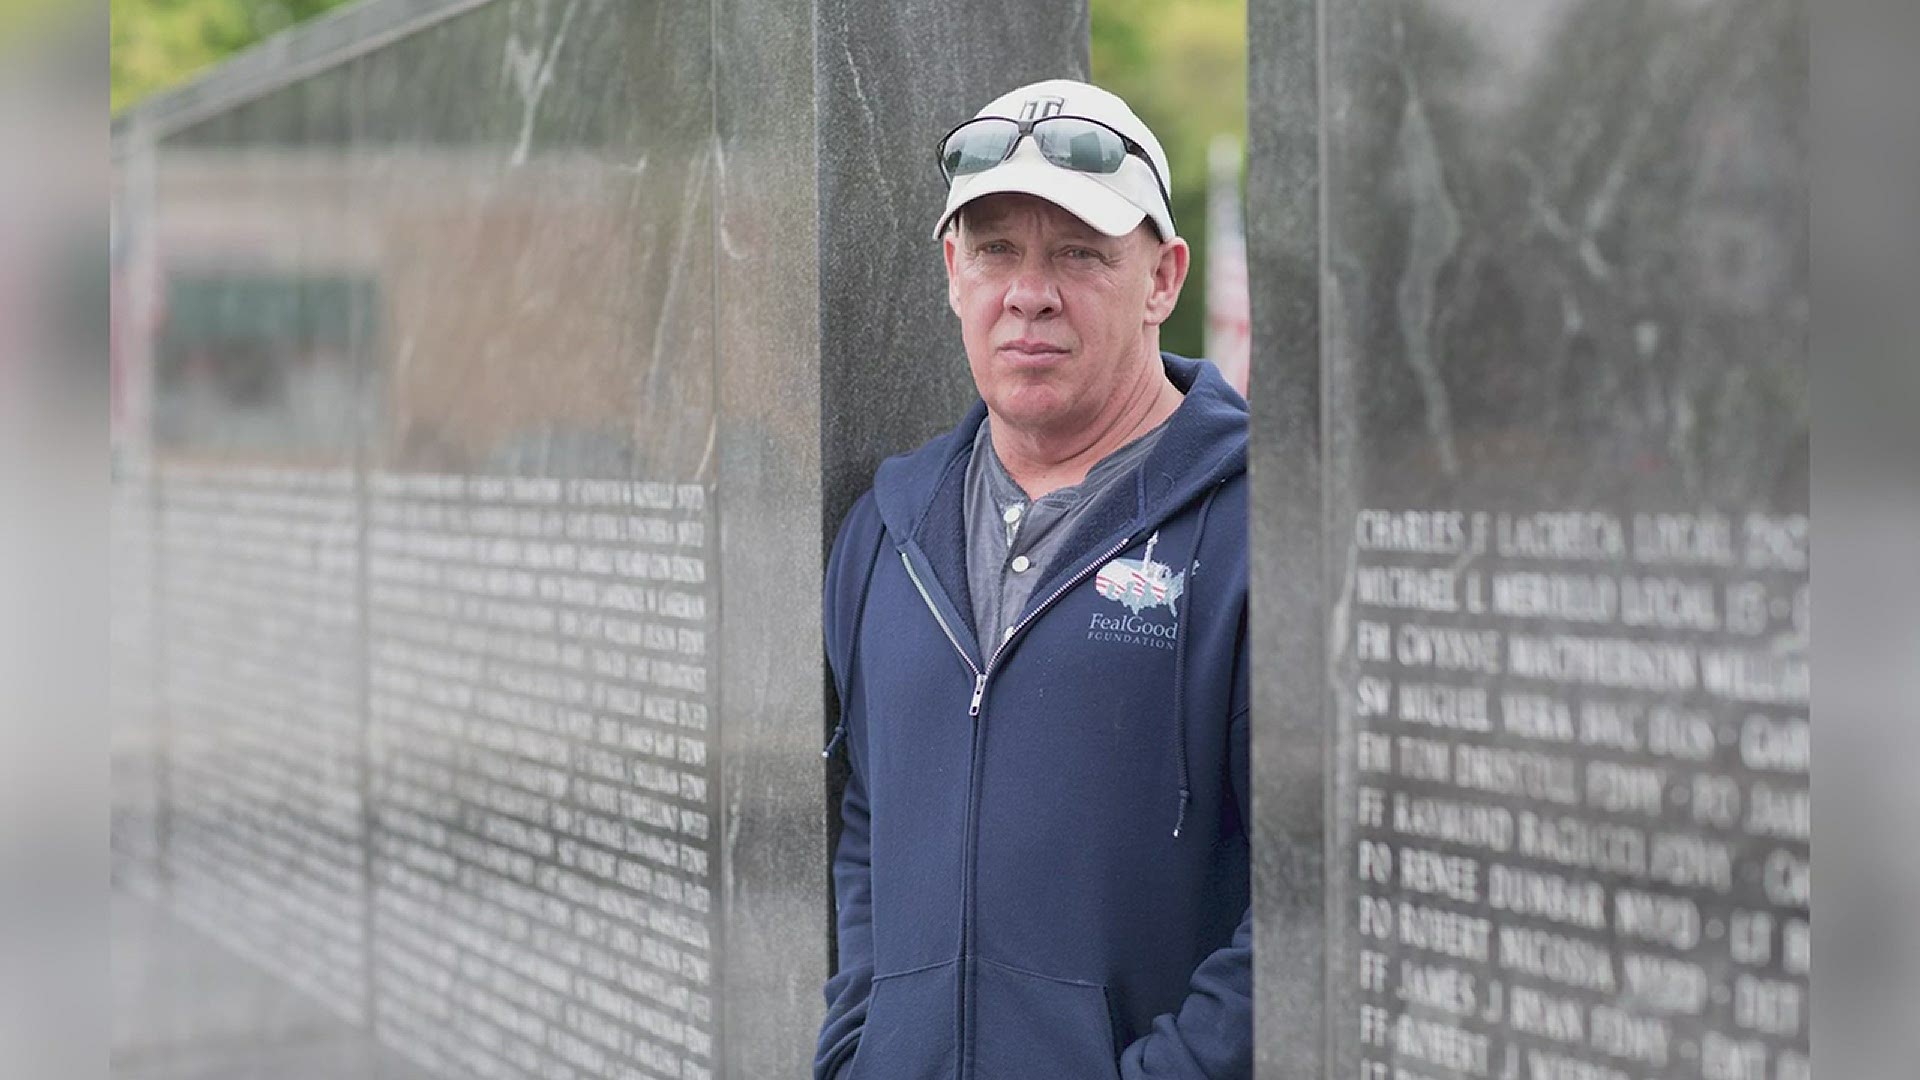 John Feal has seen first-hand COVID-19’s impact on the heroes who survived Sept. 11, 2001, but not the virus.